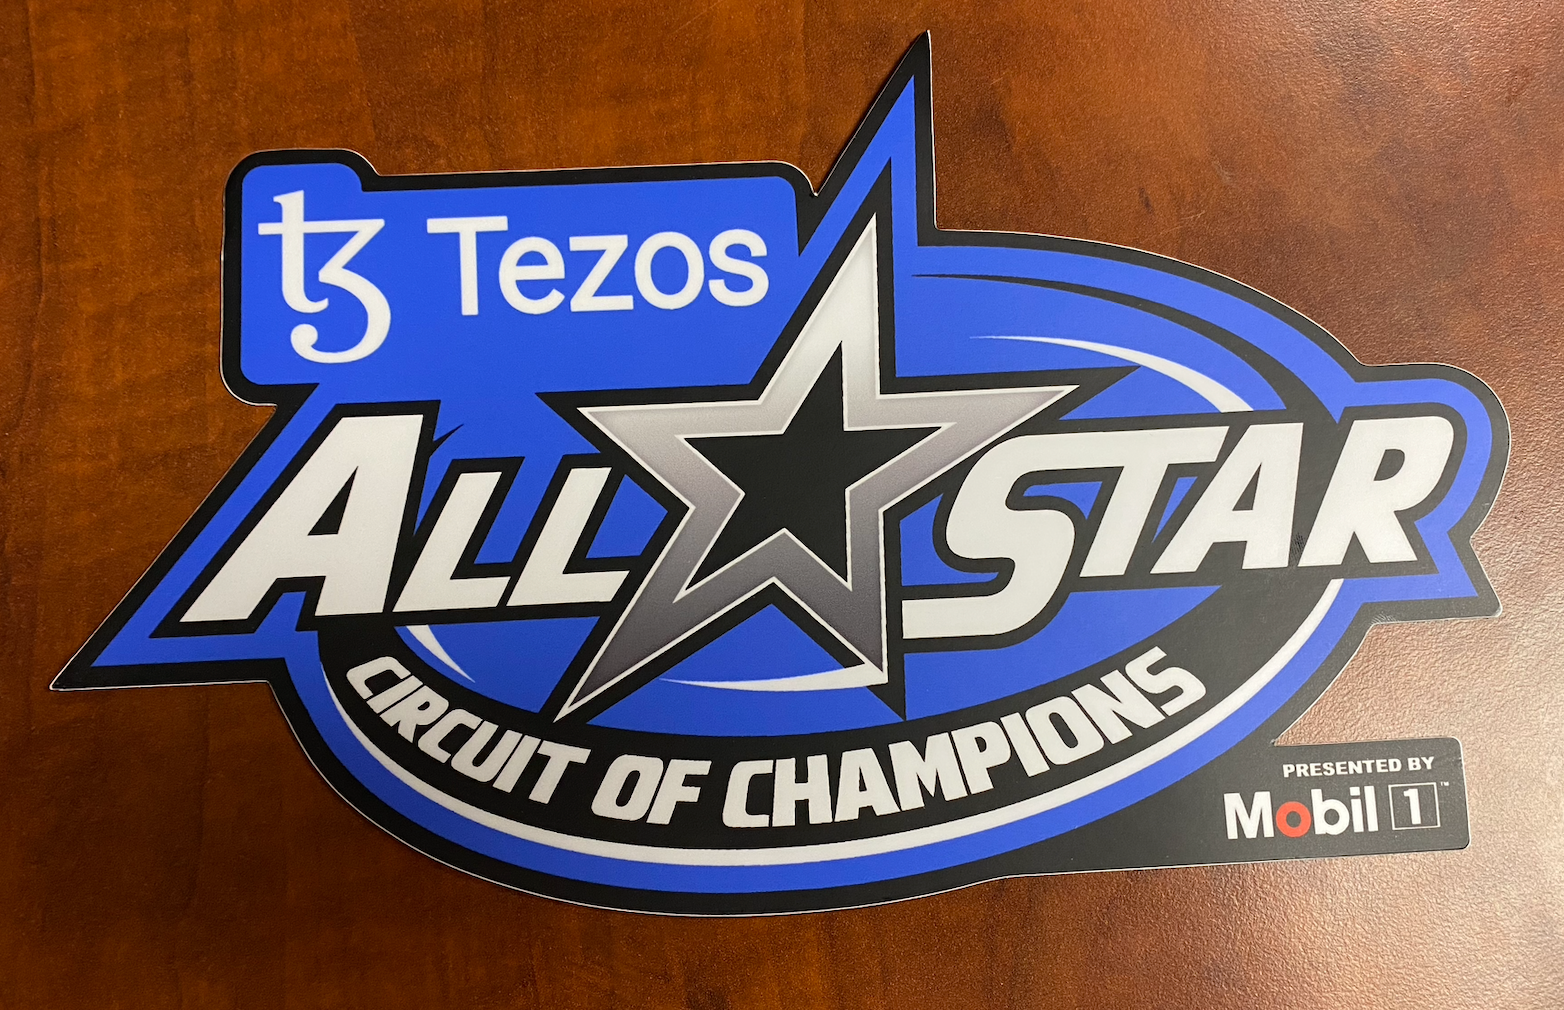 Tezos All Star Circuit of Champions Series Wing Panel Decal